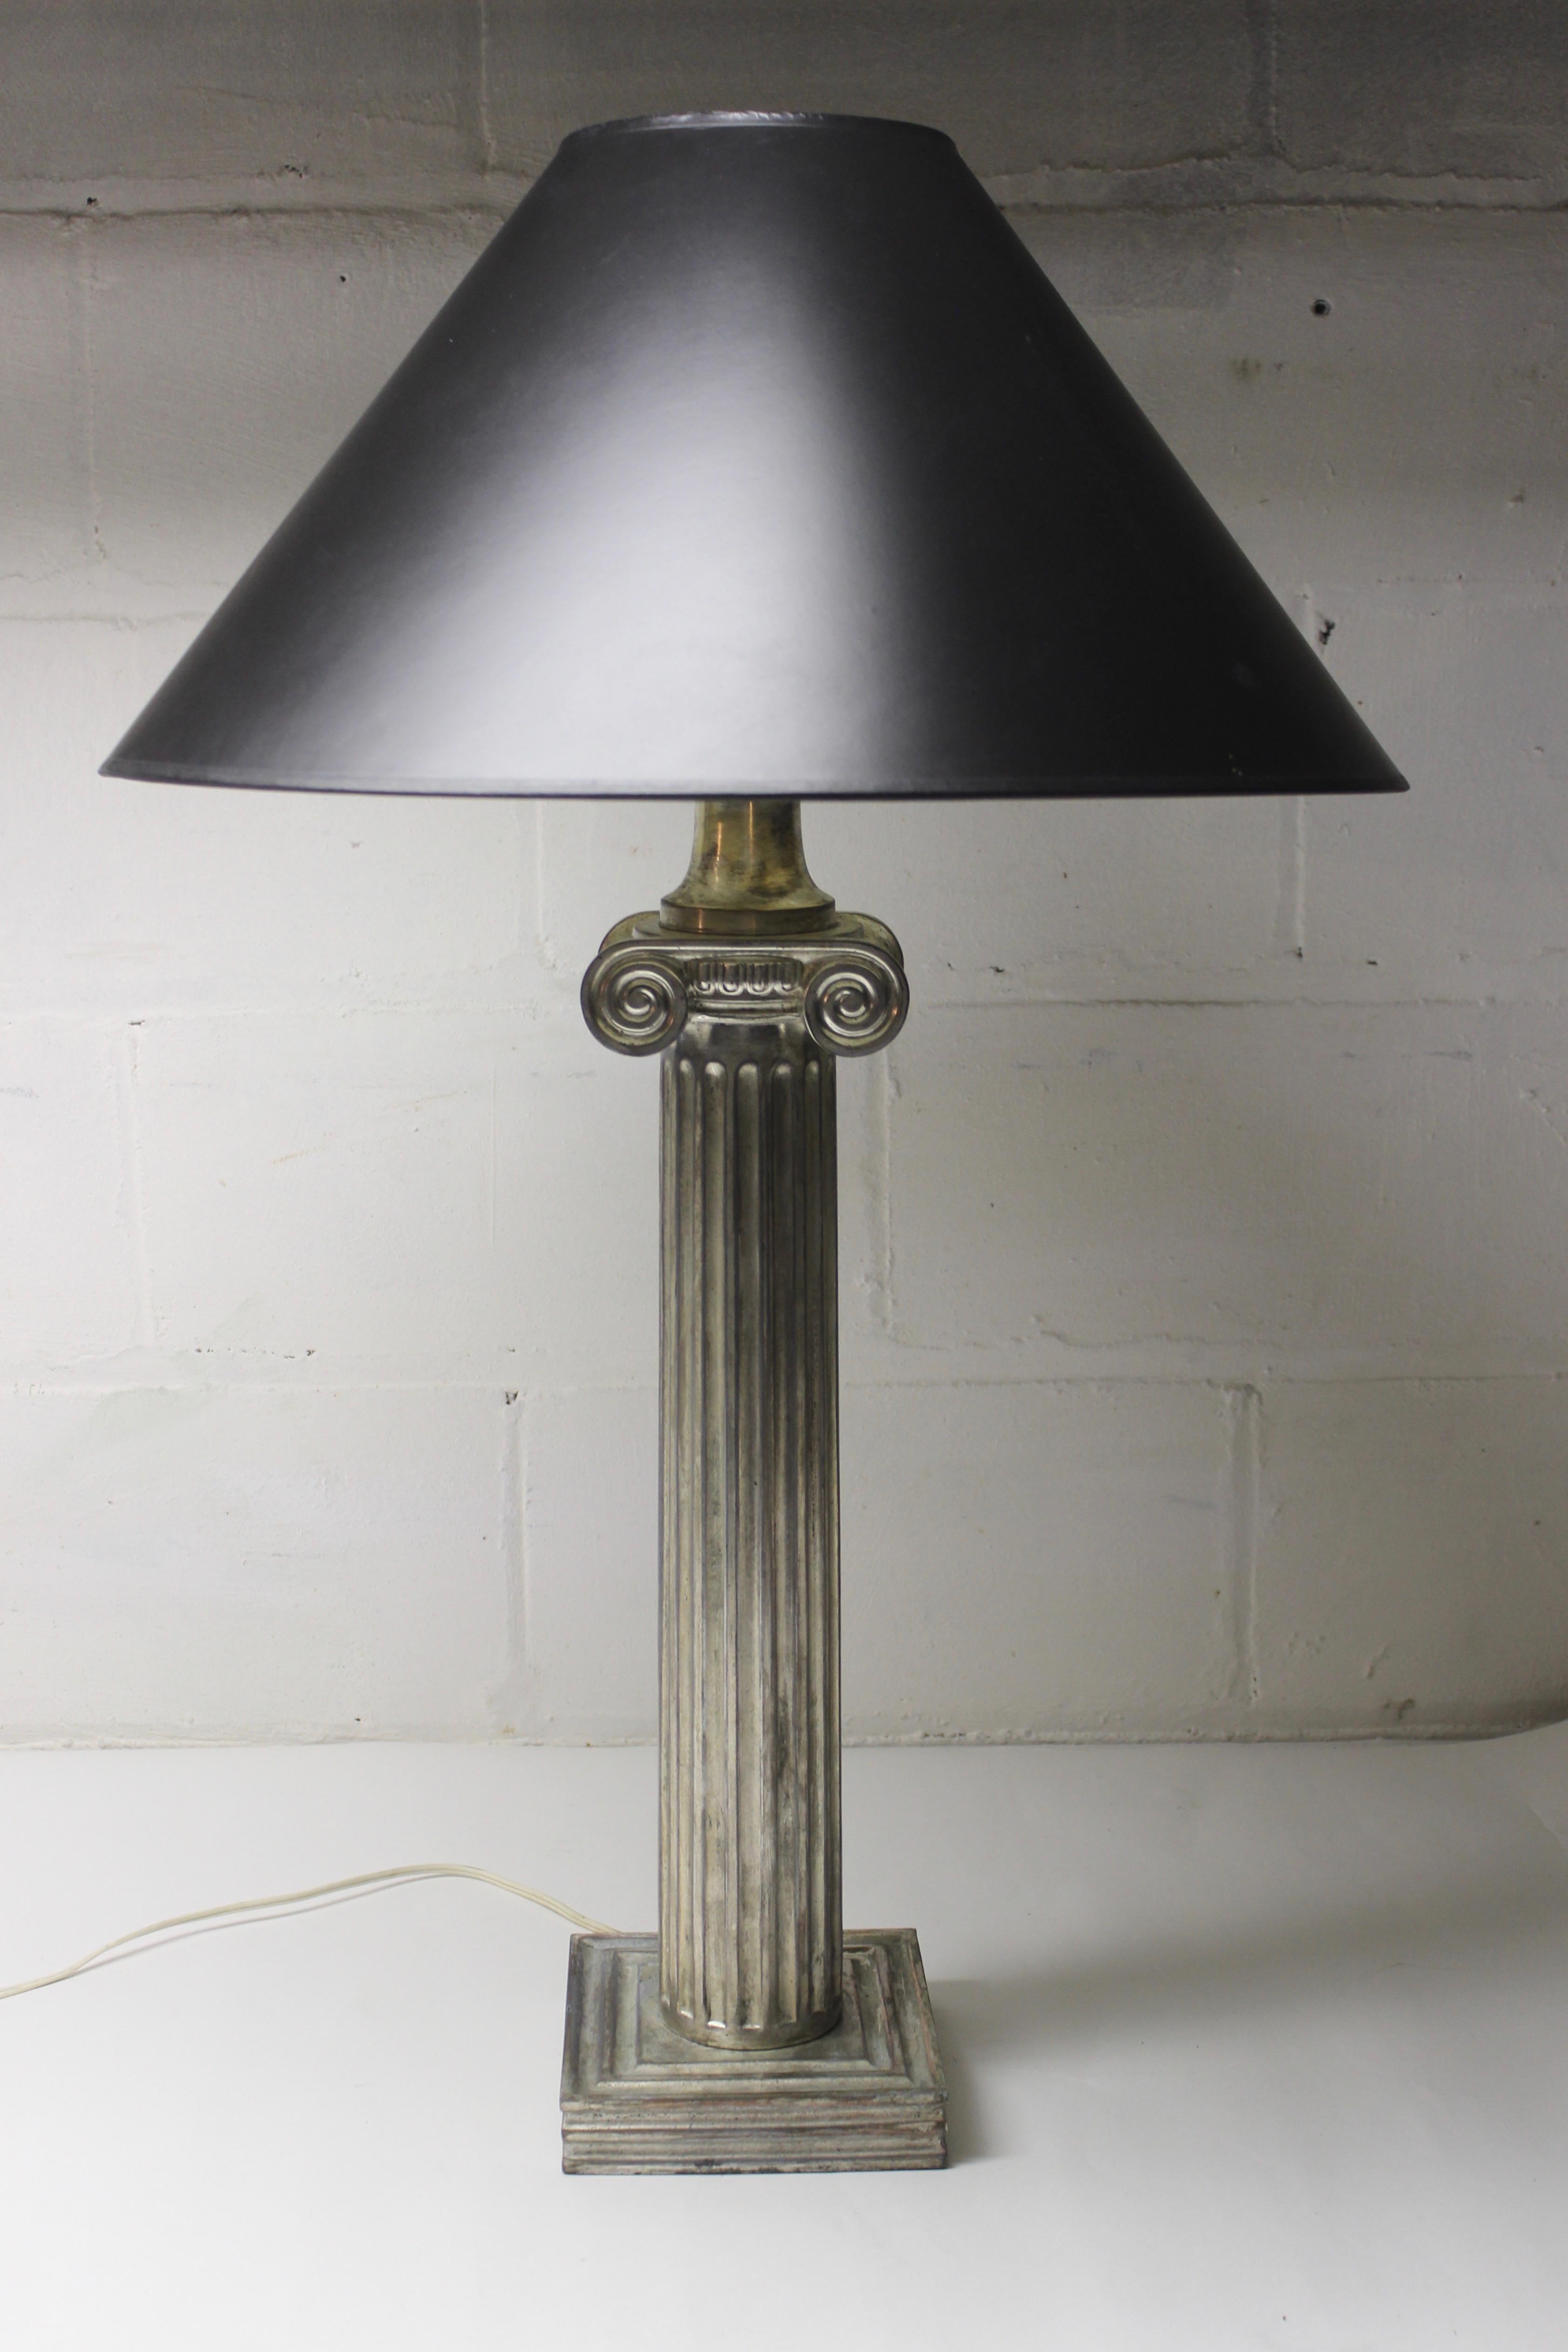 Metal ionic column table lamp. Works well, shade not included.